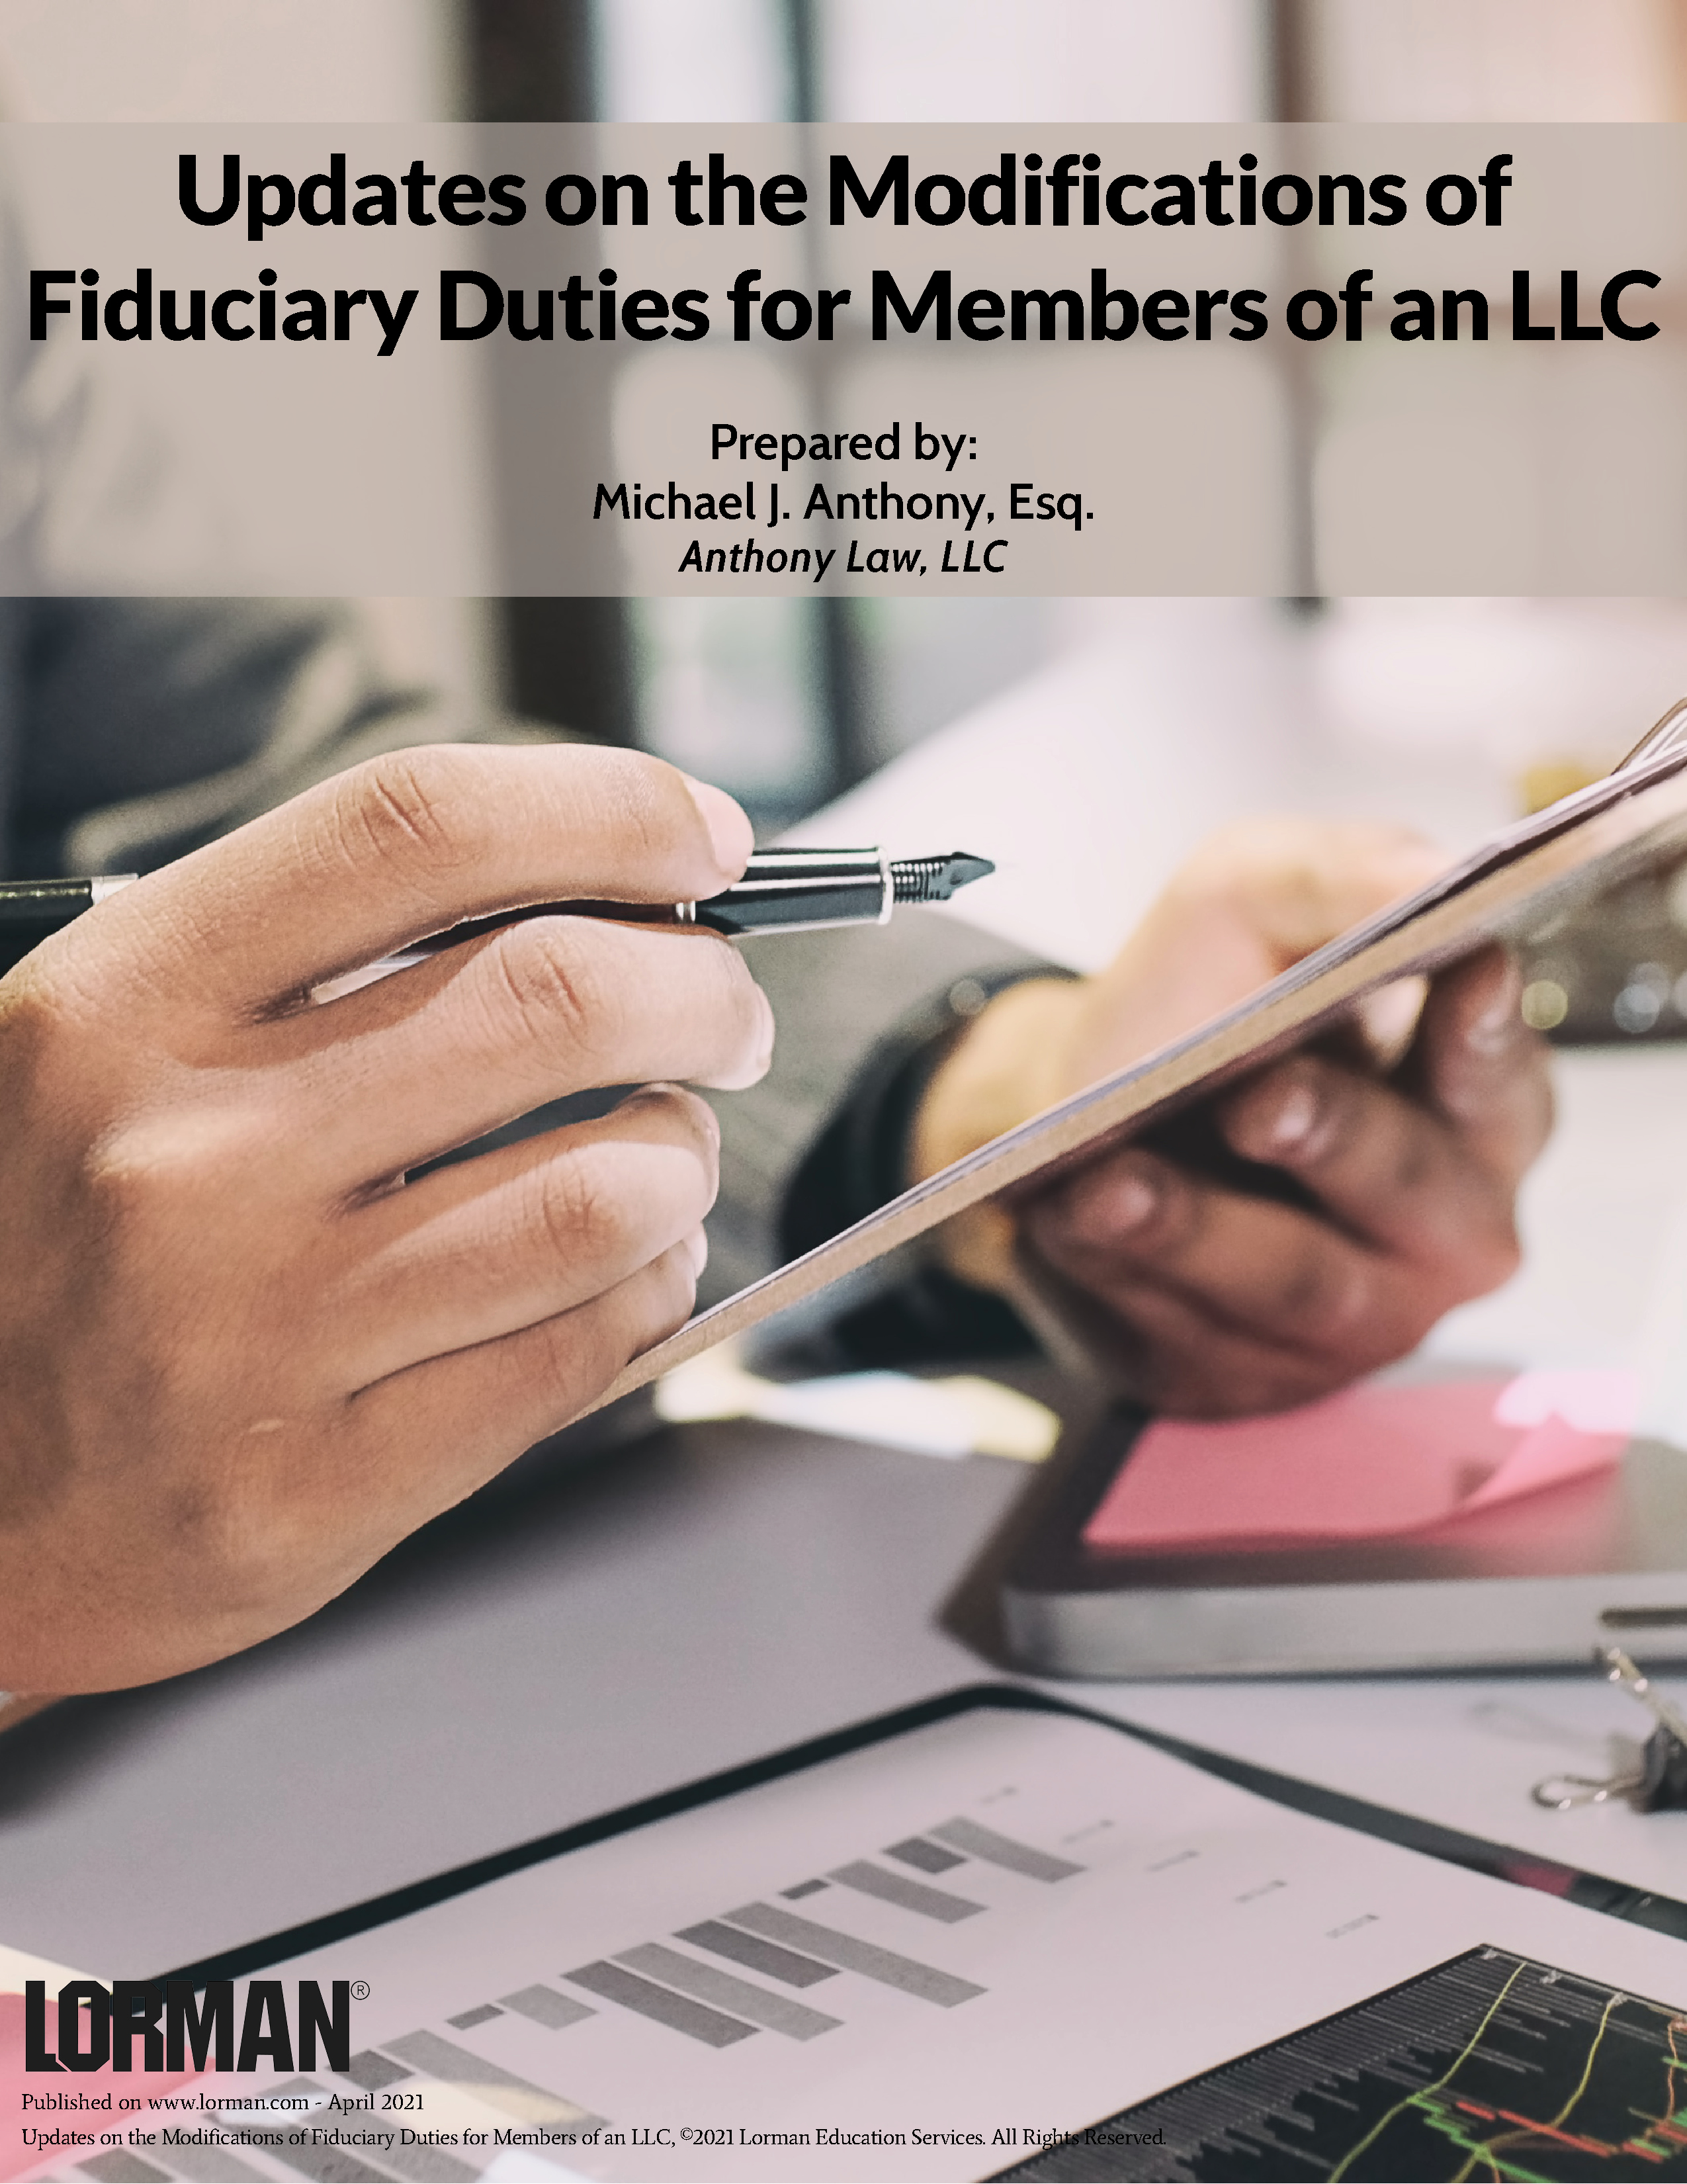 Updates on the Modifications of Fiduciary Duties for Members of an LLC